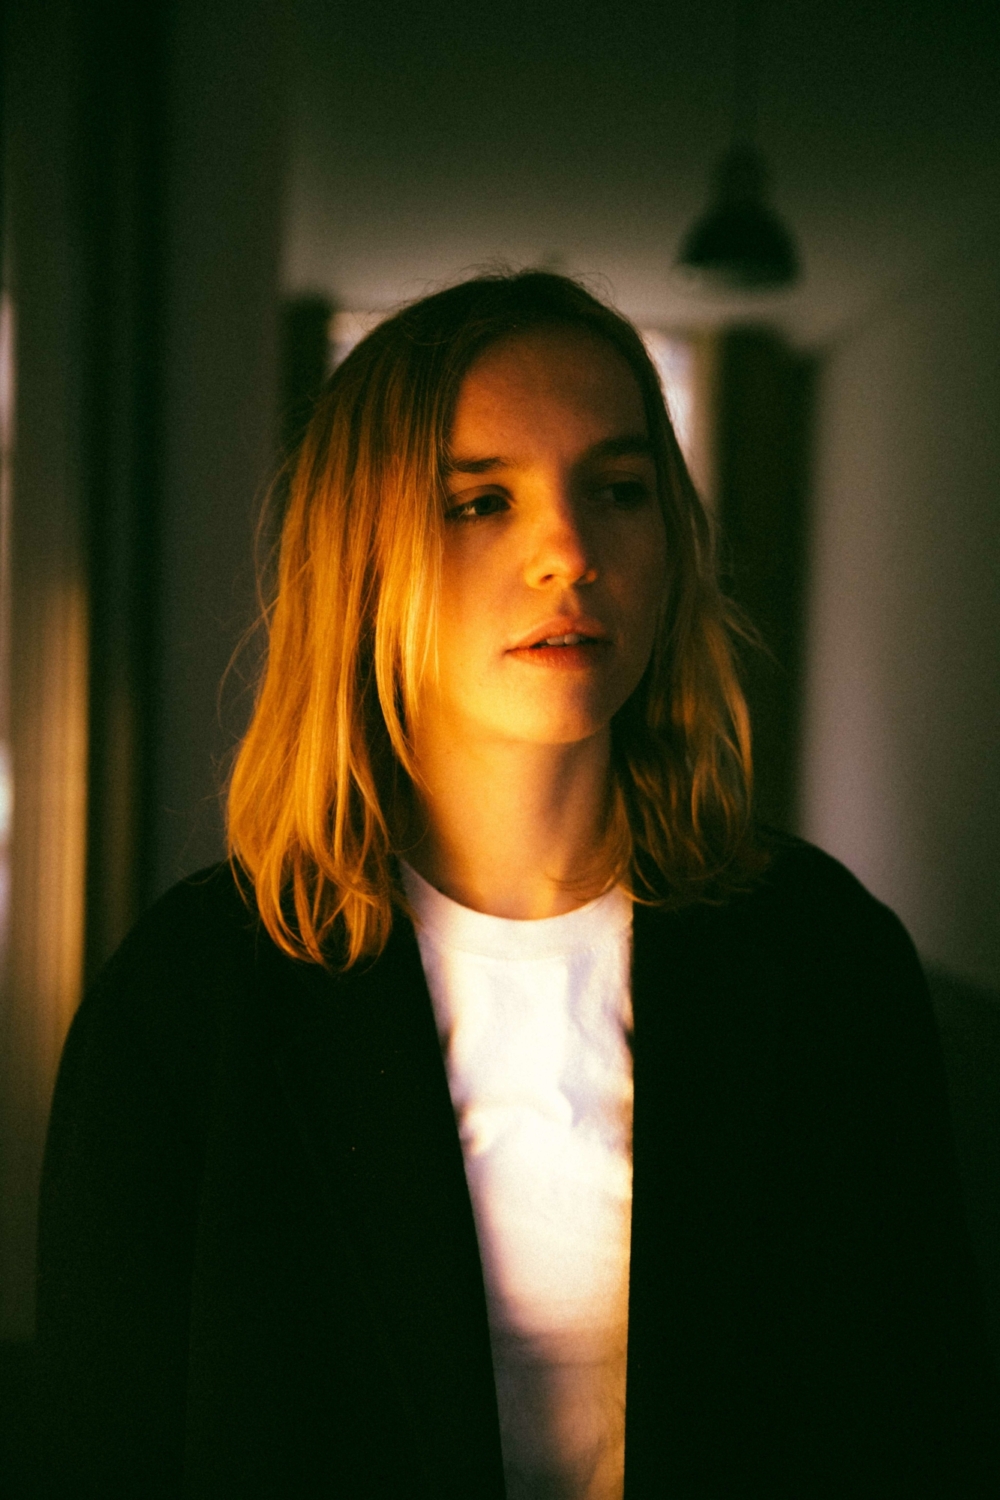 Burning down the house: The Japanese House